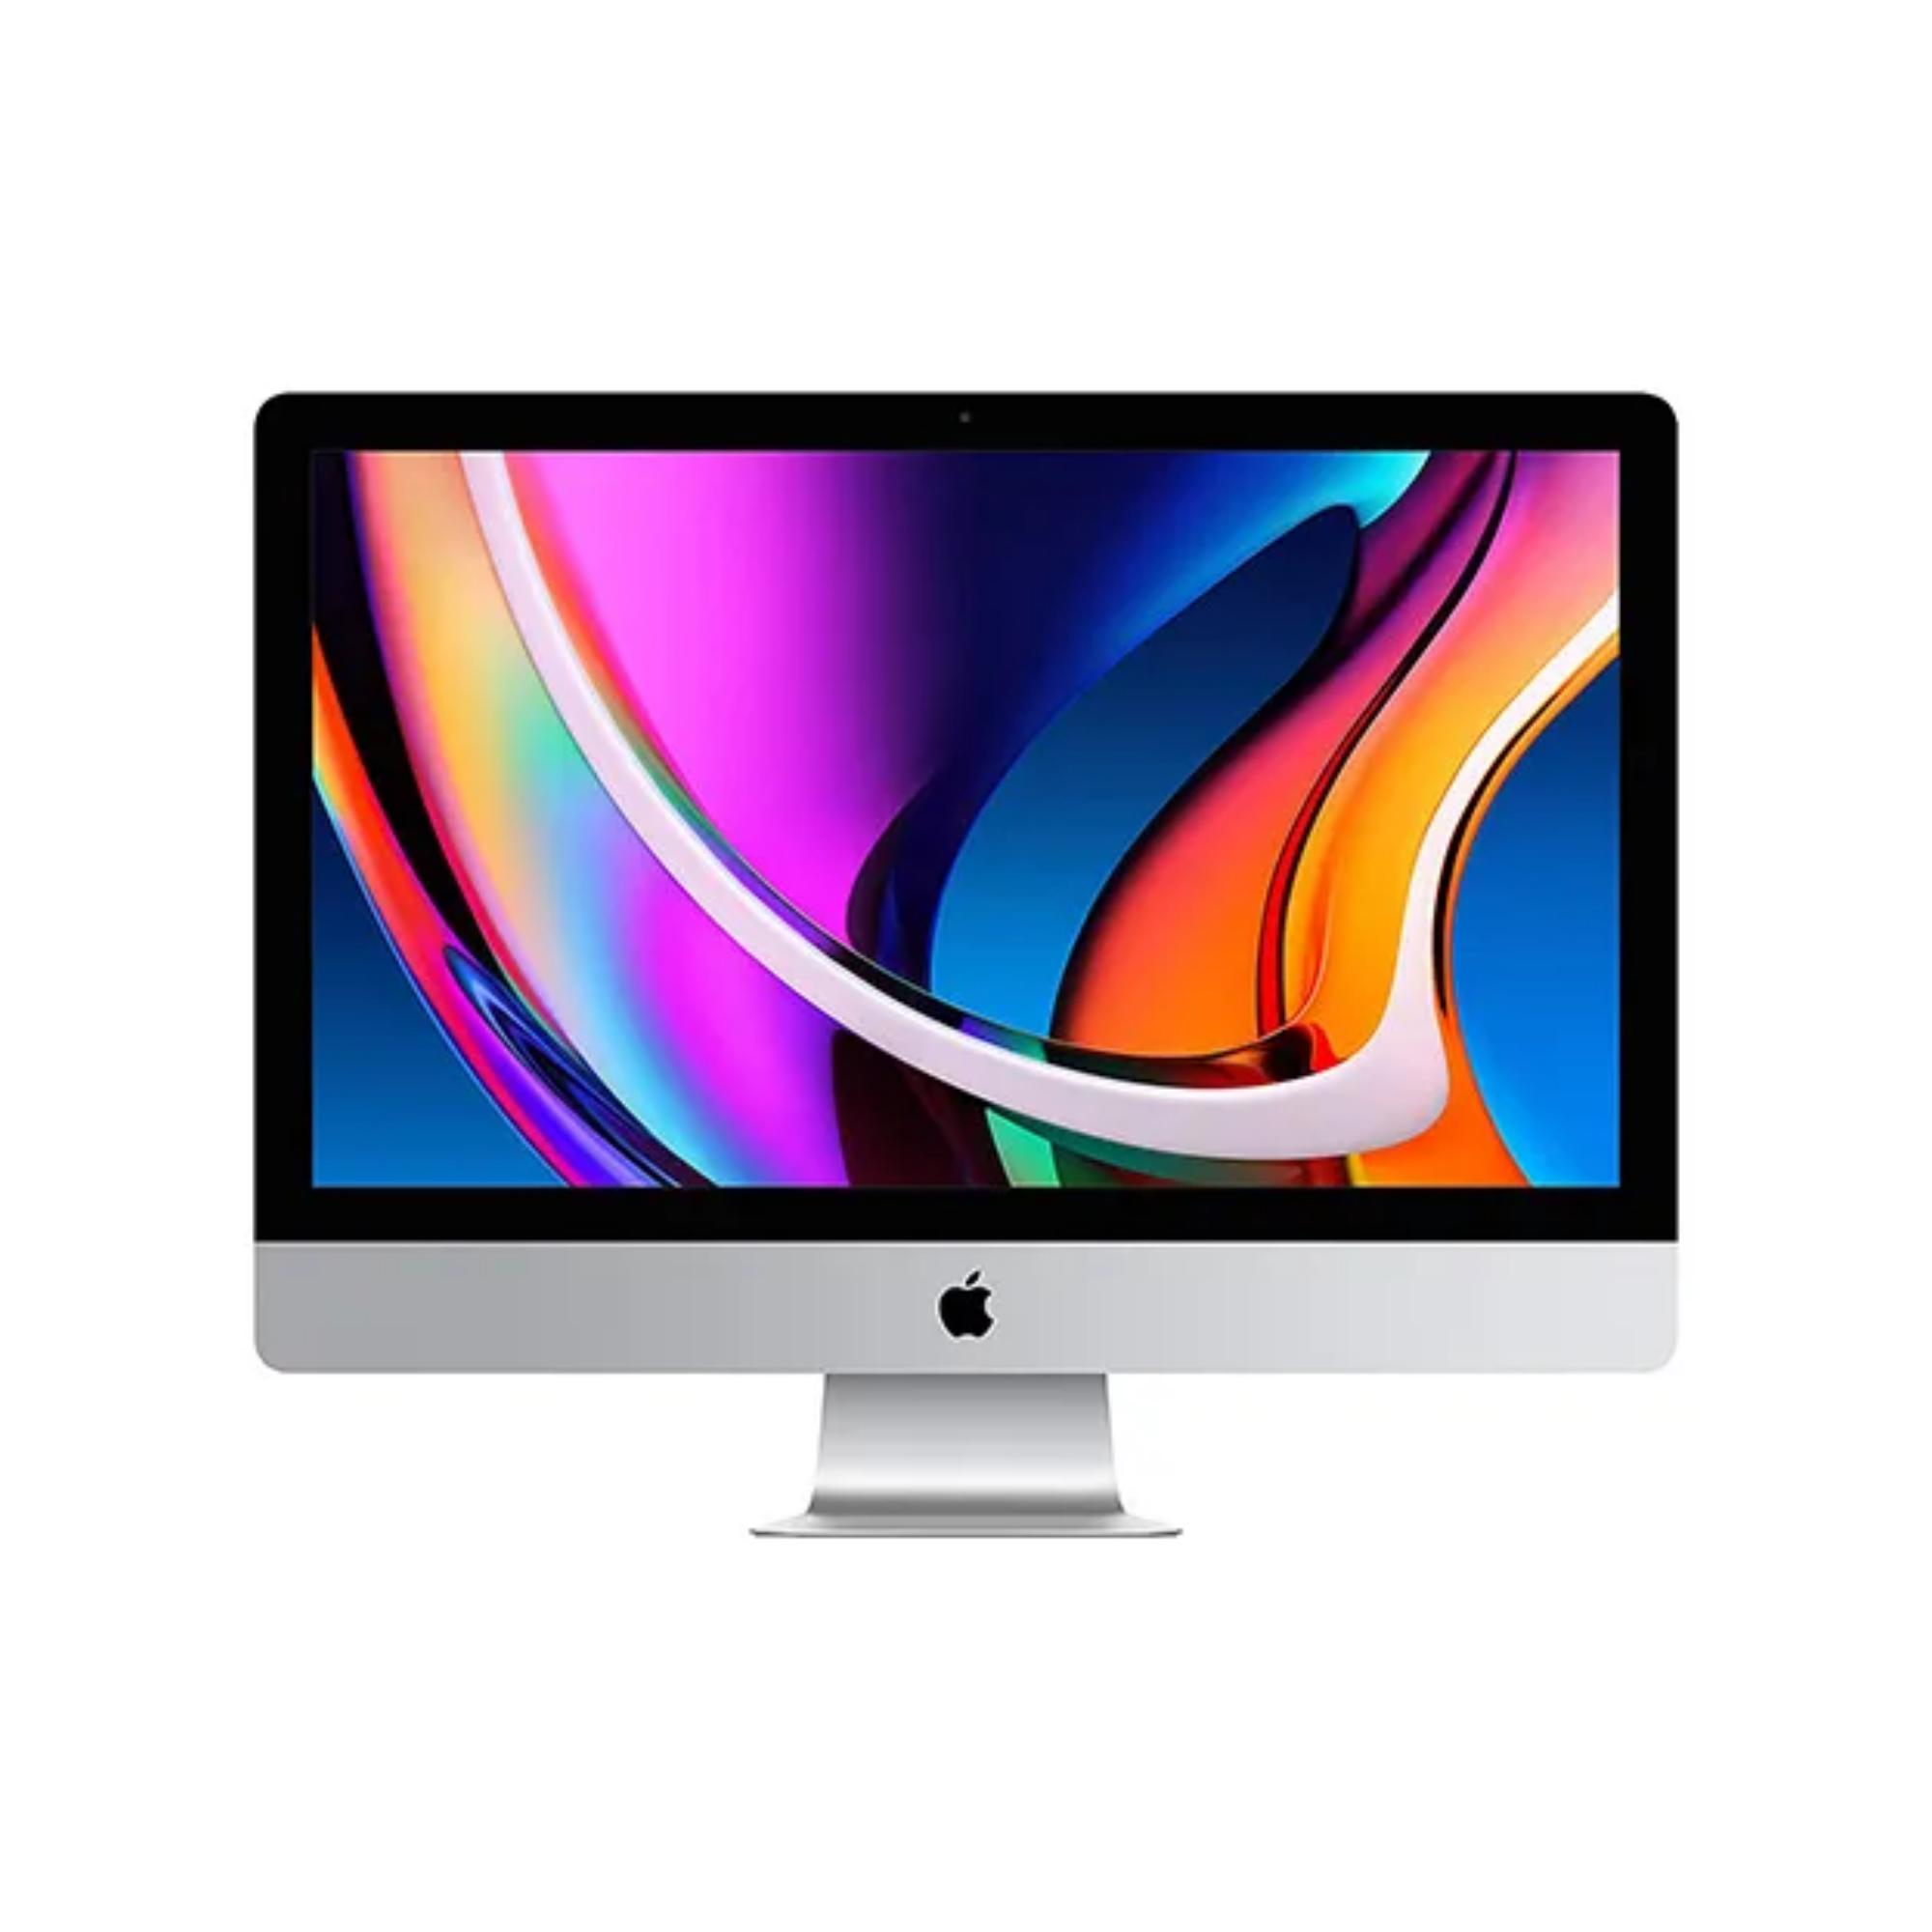 iMac – iMac 5.1 A1208 CORE 2 DUO / 1GB / 250GB / MACOS – A1208DC-U<br><br><span STYLE="background:#39ac37;"><font color="white"> DISPONIBILE </font></span>